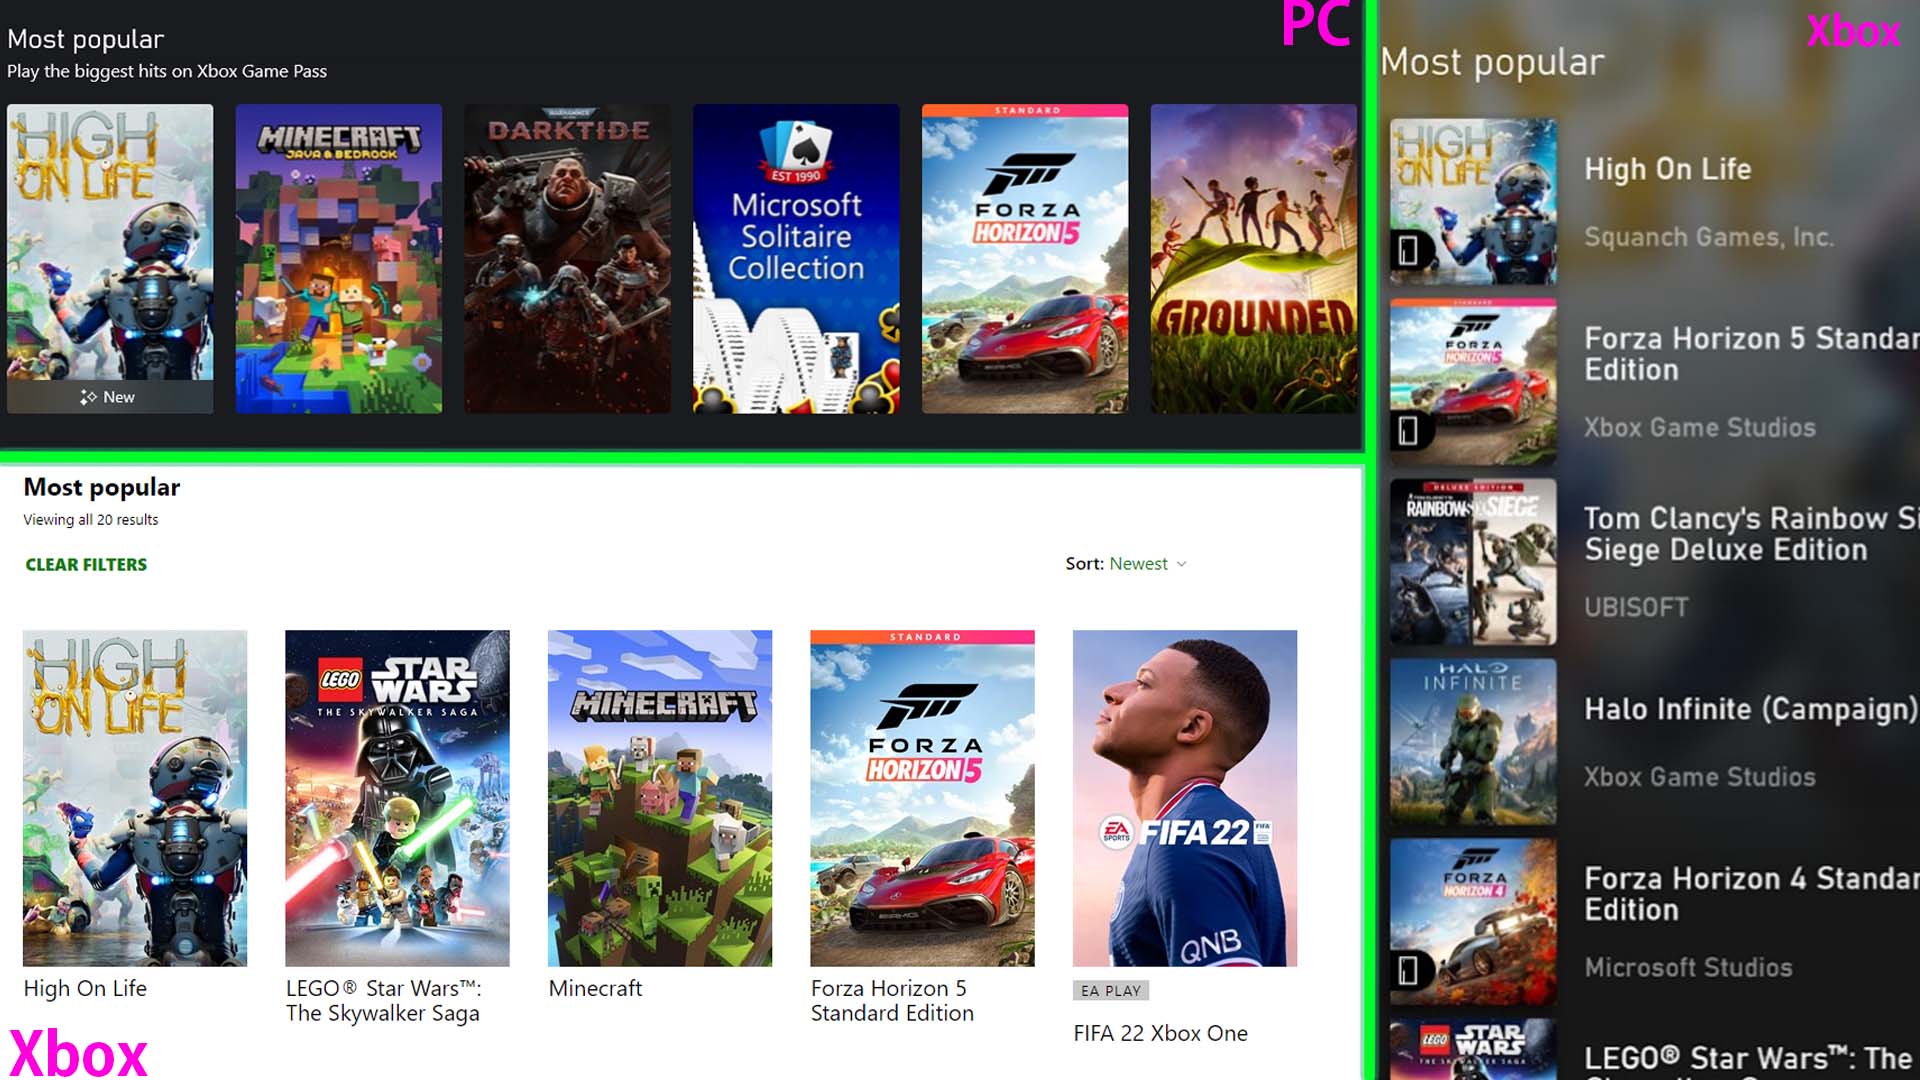 High on Life overtakes Minecraft as current most popular Game Pass title